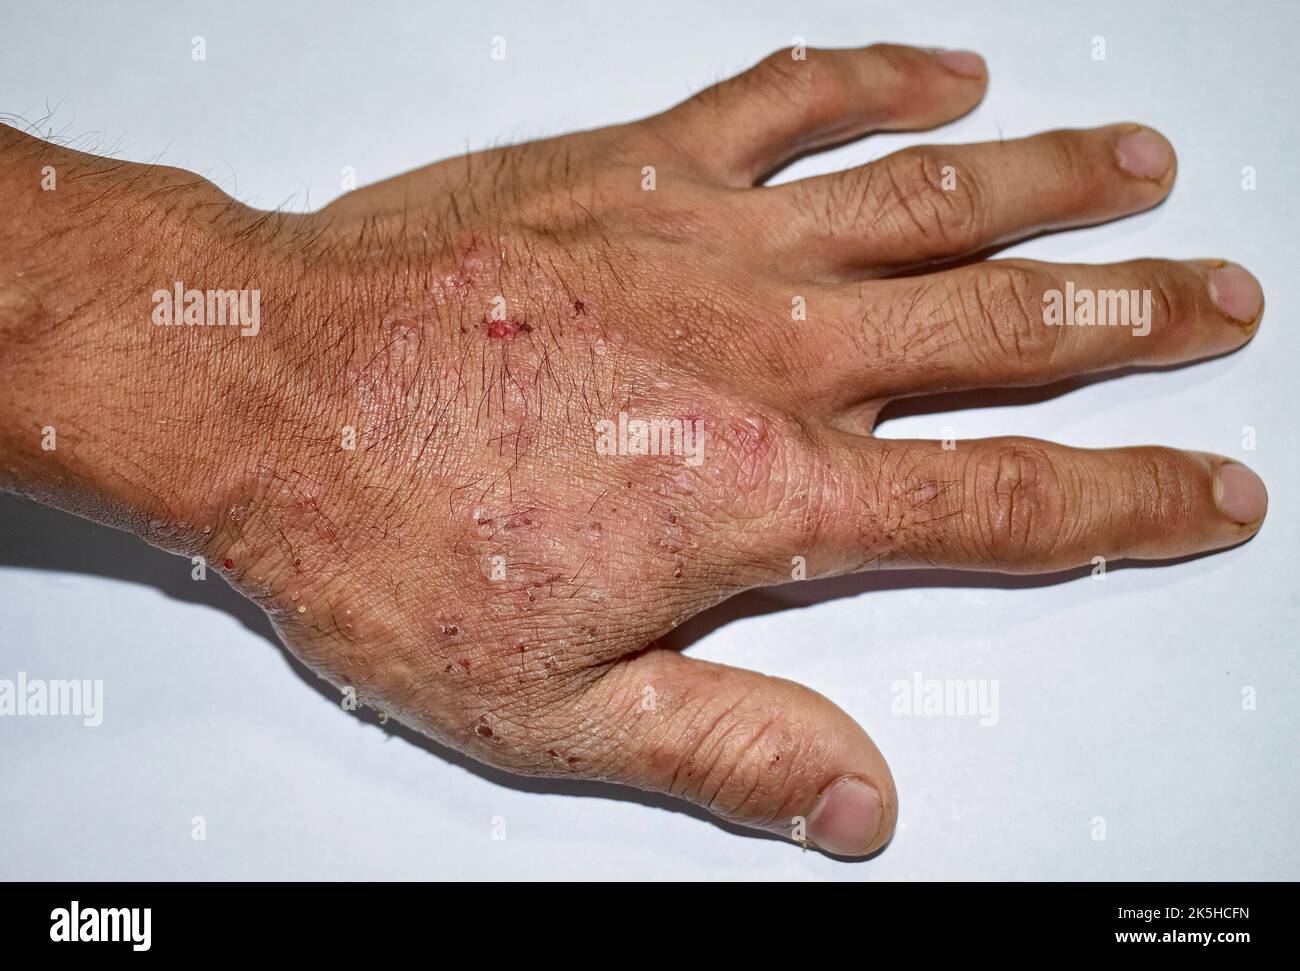 Itchy skin lesions in hand of Asian adult man. It may be caused by scabies infestation or fungal infection. Stock Photo